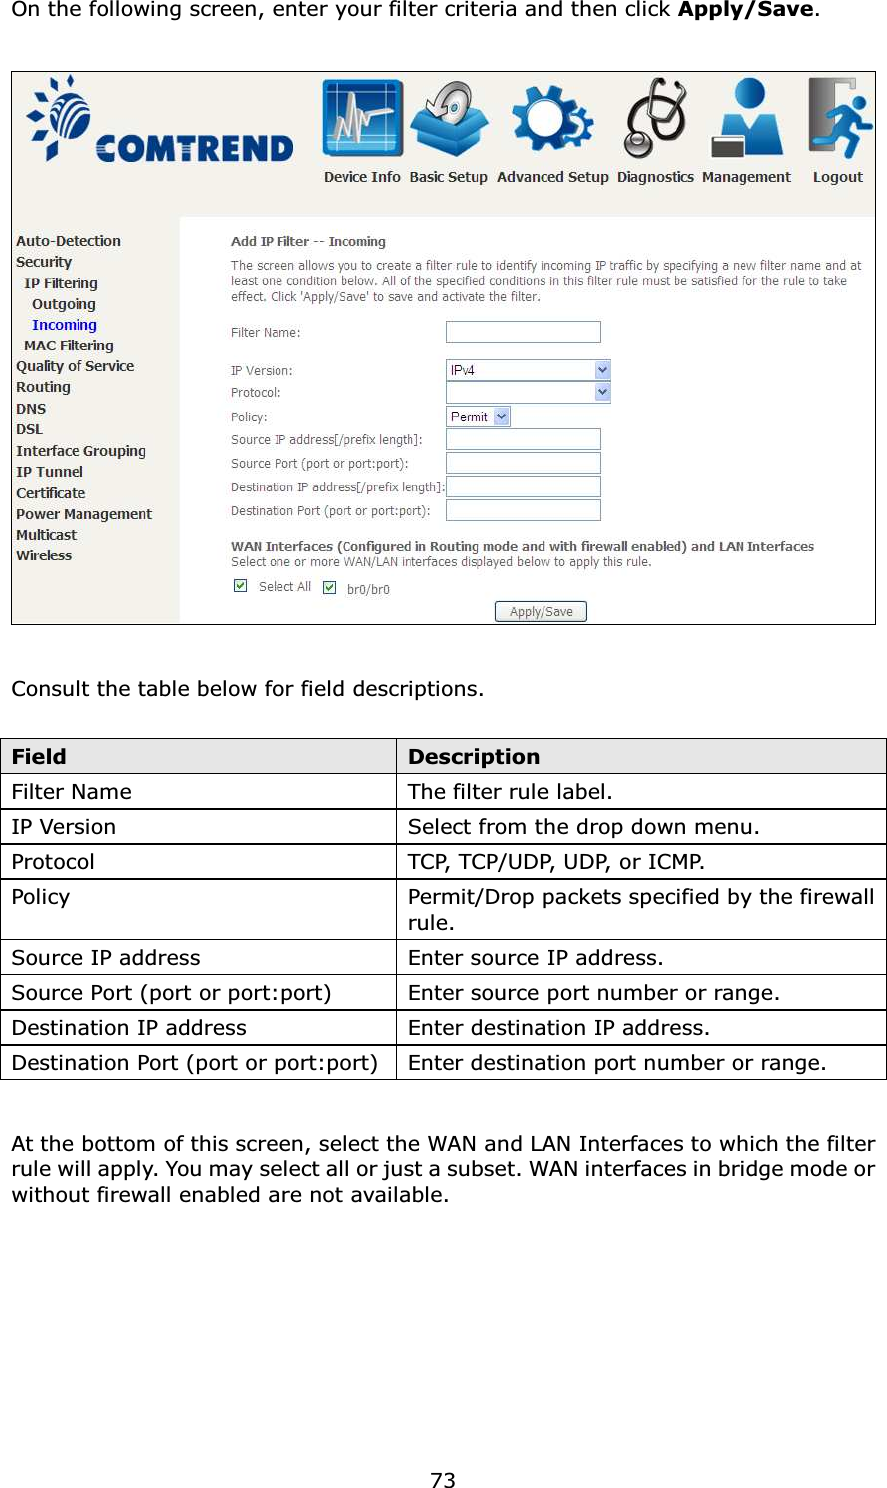  73On the following screen, enter your filter criteria and then click Apply/Save.    Consult the table below for field descriptions.  Field  Description Filter Name  The filter rule label. IP Version  Select from the drop down menu. Protocol  TC P,  T C P / U D P,  U D P,  o r  I C M P.  Policy  Permit/Drop packets specified by the firewall rule. Source IP address  Enter source IP address. Source Port (port or port:port)  Enter source port number or range. Destination IP address  Enter destination IP address. Destination Port (port or port:port) Enter destination port number or range.  At the bottom of this screen, select the WAN and LAN Interfaces to which the filter rule will apply. You may select all or just a subset. WAN interfaces in bridge mode or without firewall enabled are not available.       